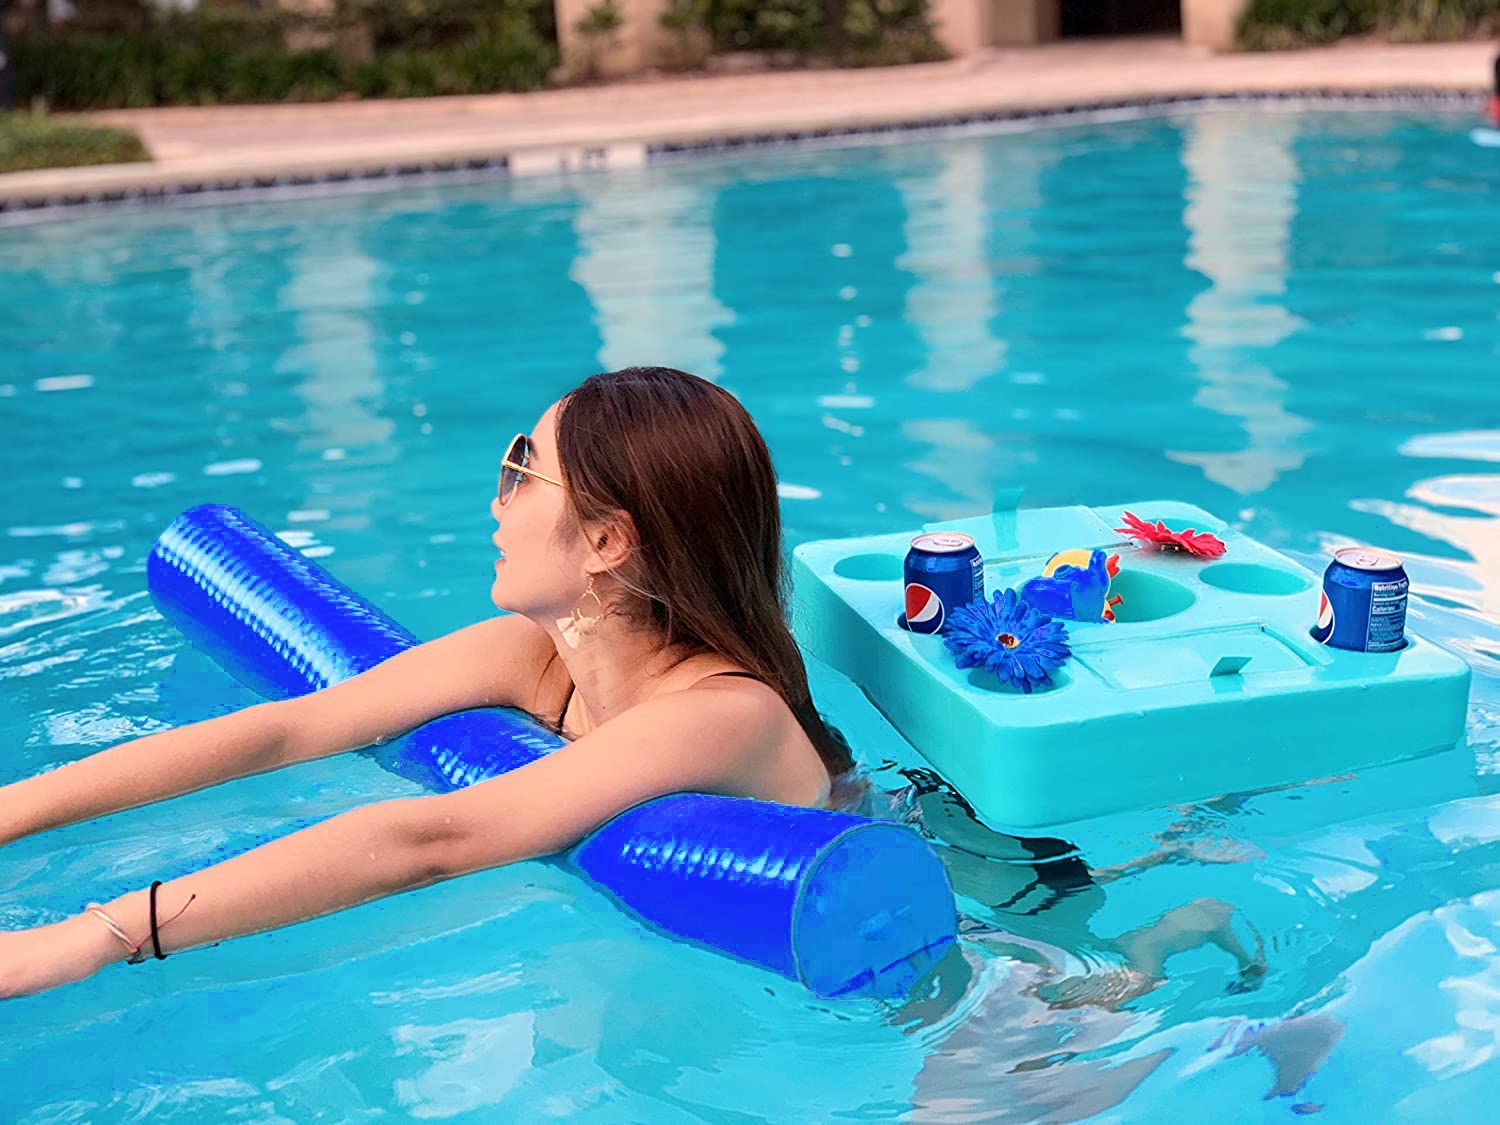 Handcrafted Rod Floats $1 Pool noodle 